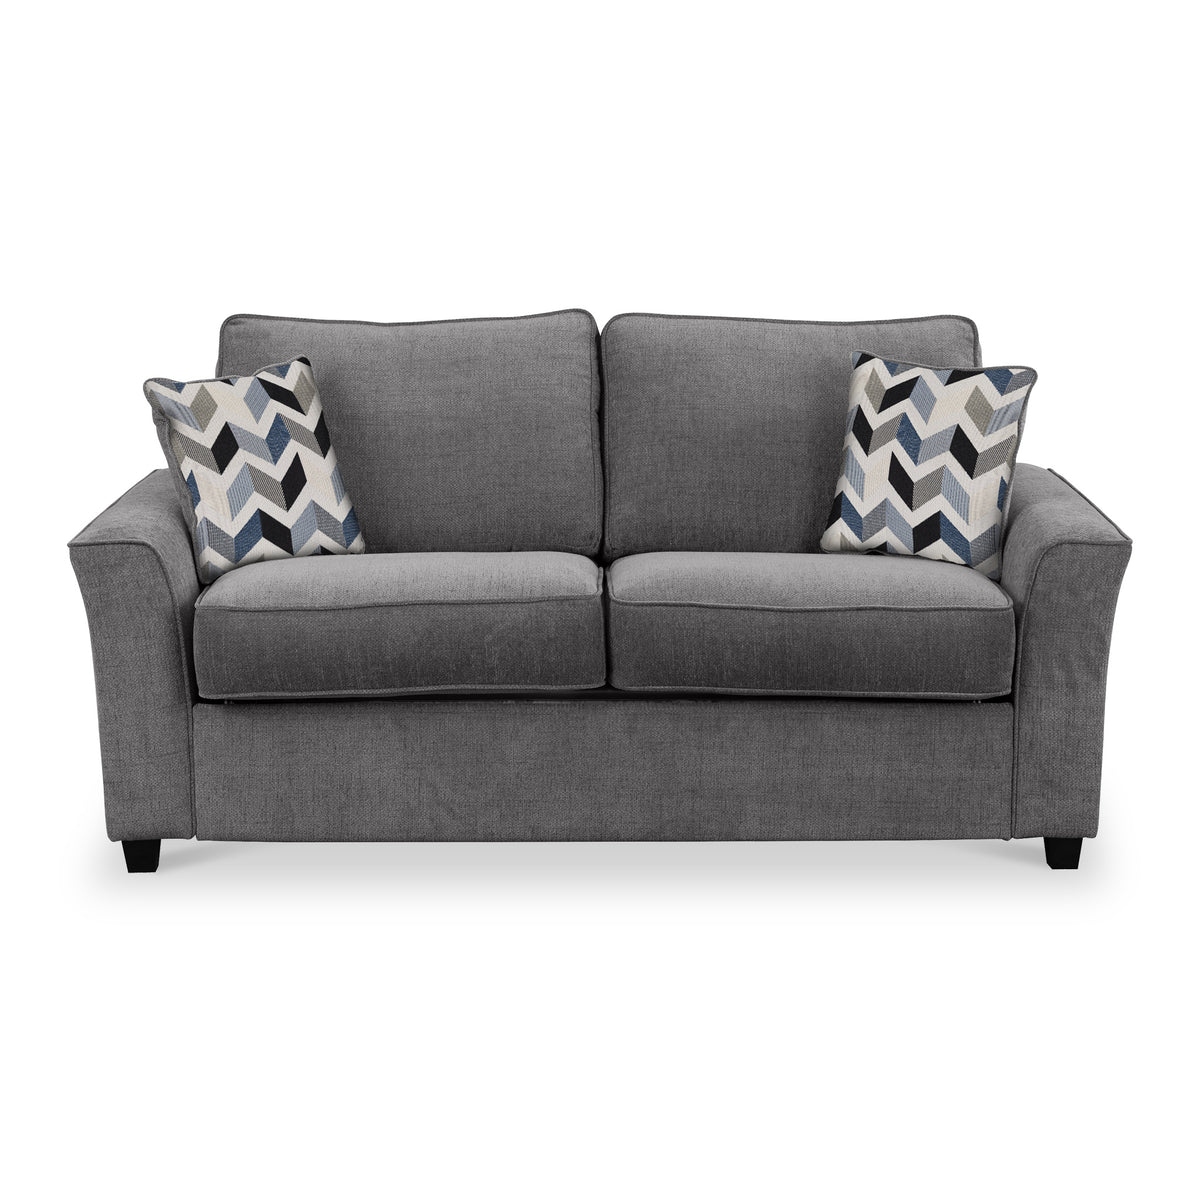 Boston 2 Seater Sofabed in Charcoal with Morelisa Denim Cushions by Roseland Furniture